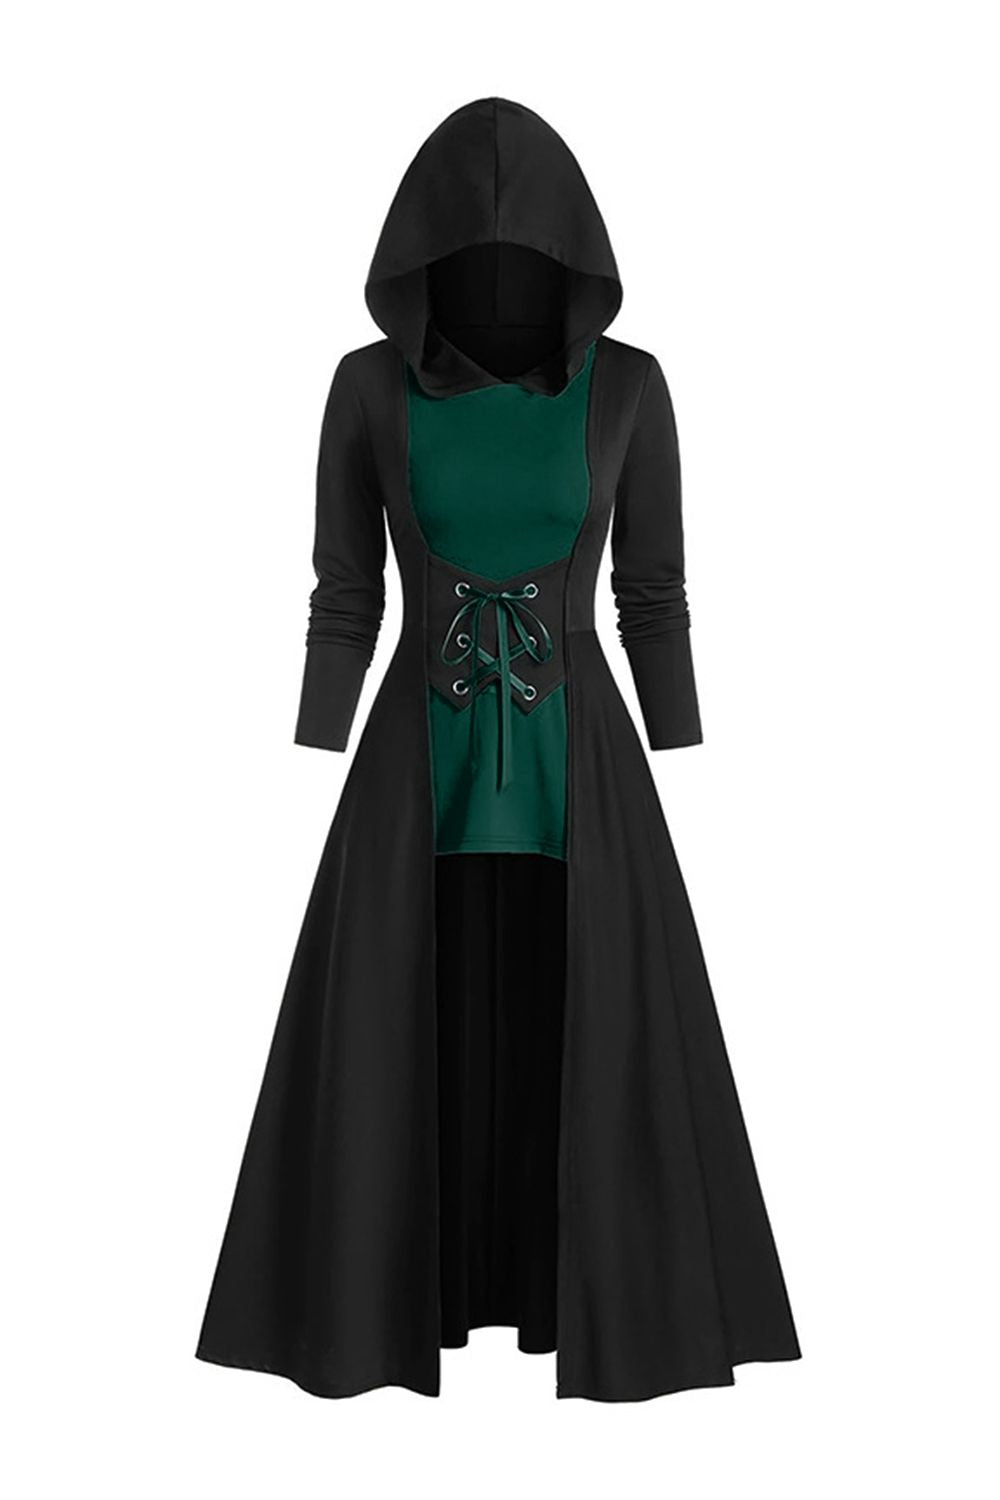 Black Long Sleeves Lace-up Halloween Dress with Hooded